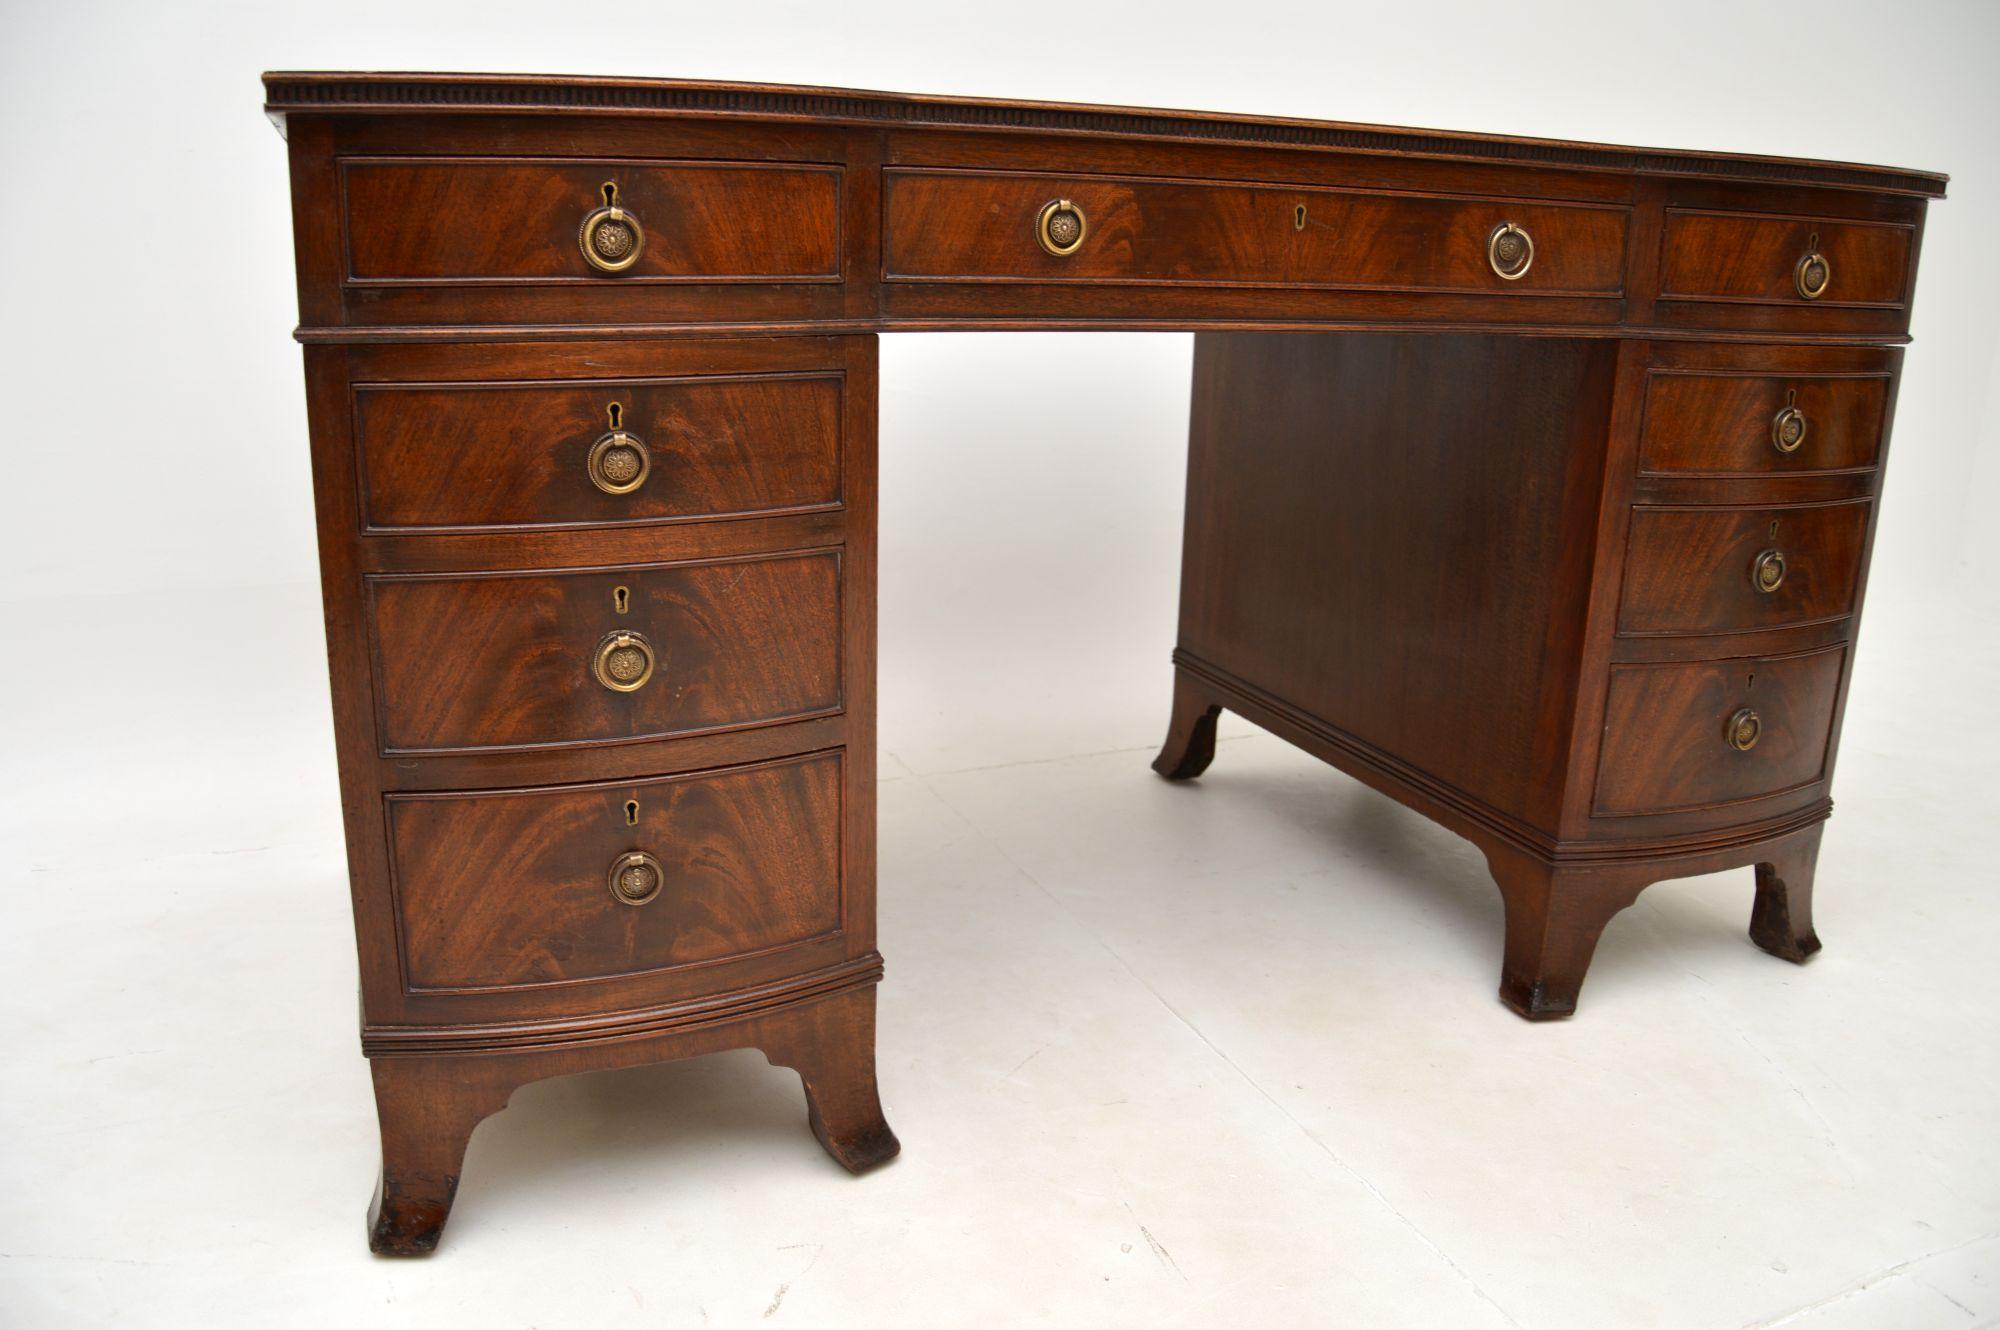 Early 20th Century Antique Leather Top Pedestal Desk